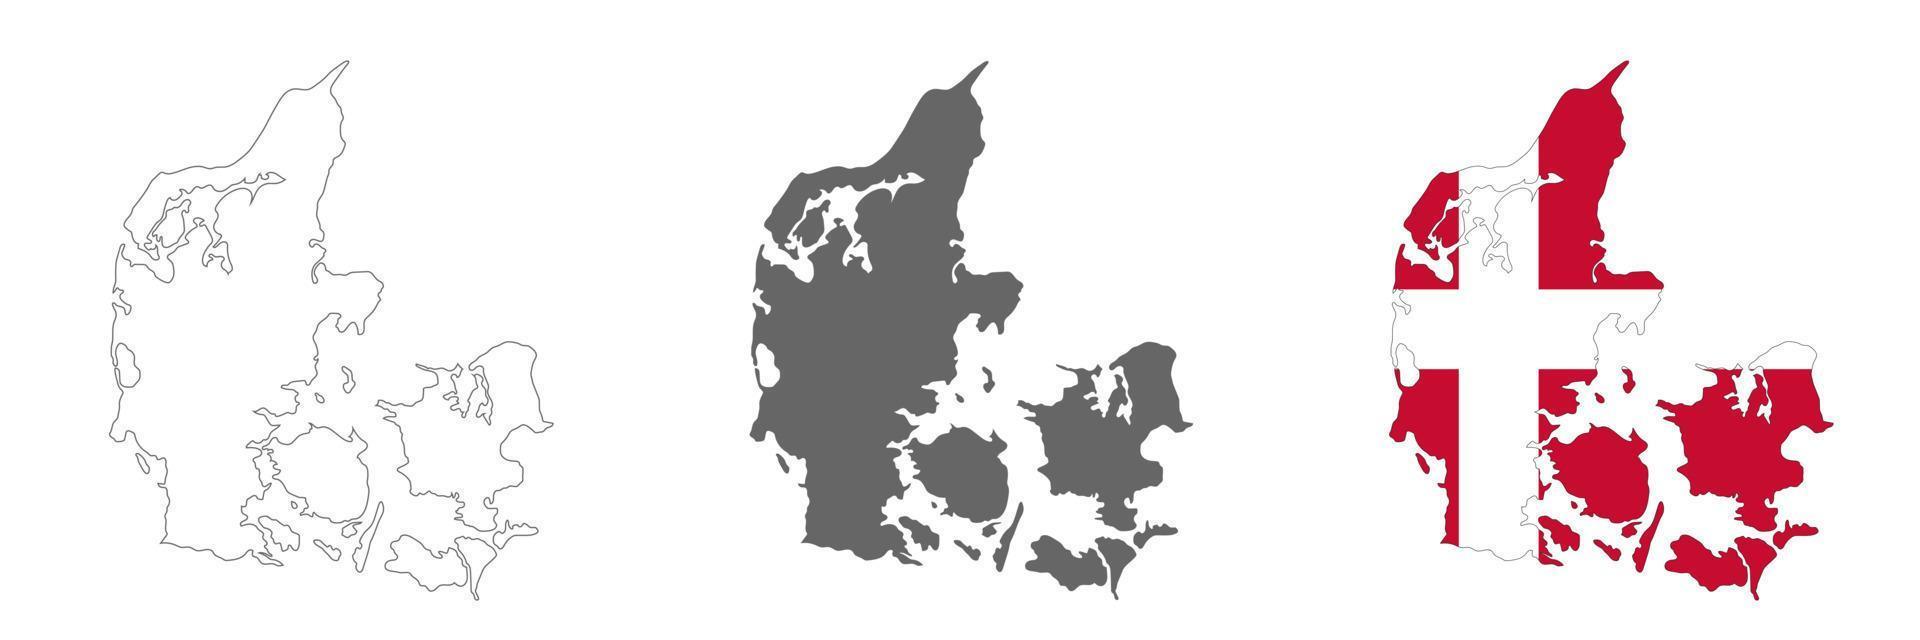 Highly detailed Kingdom of Denmark map with borders isolated on background vector